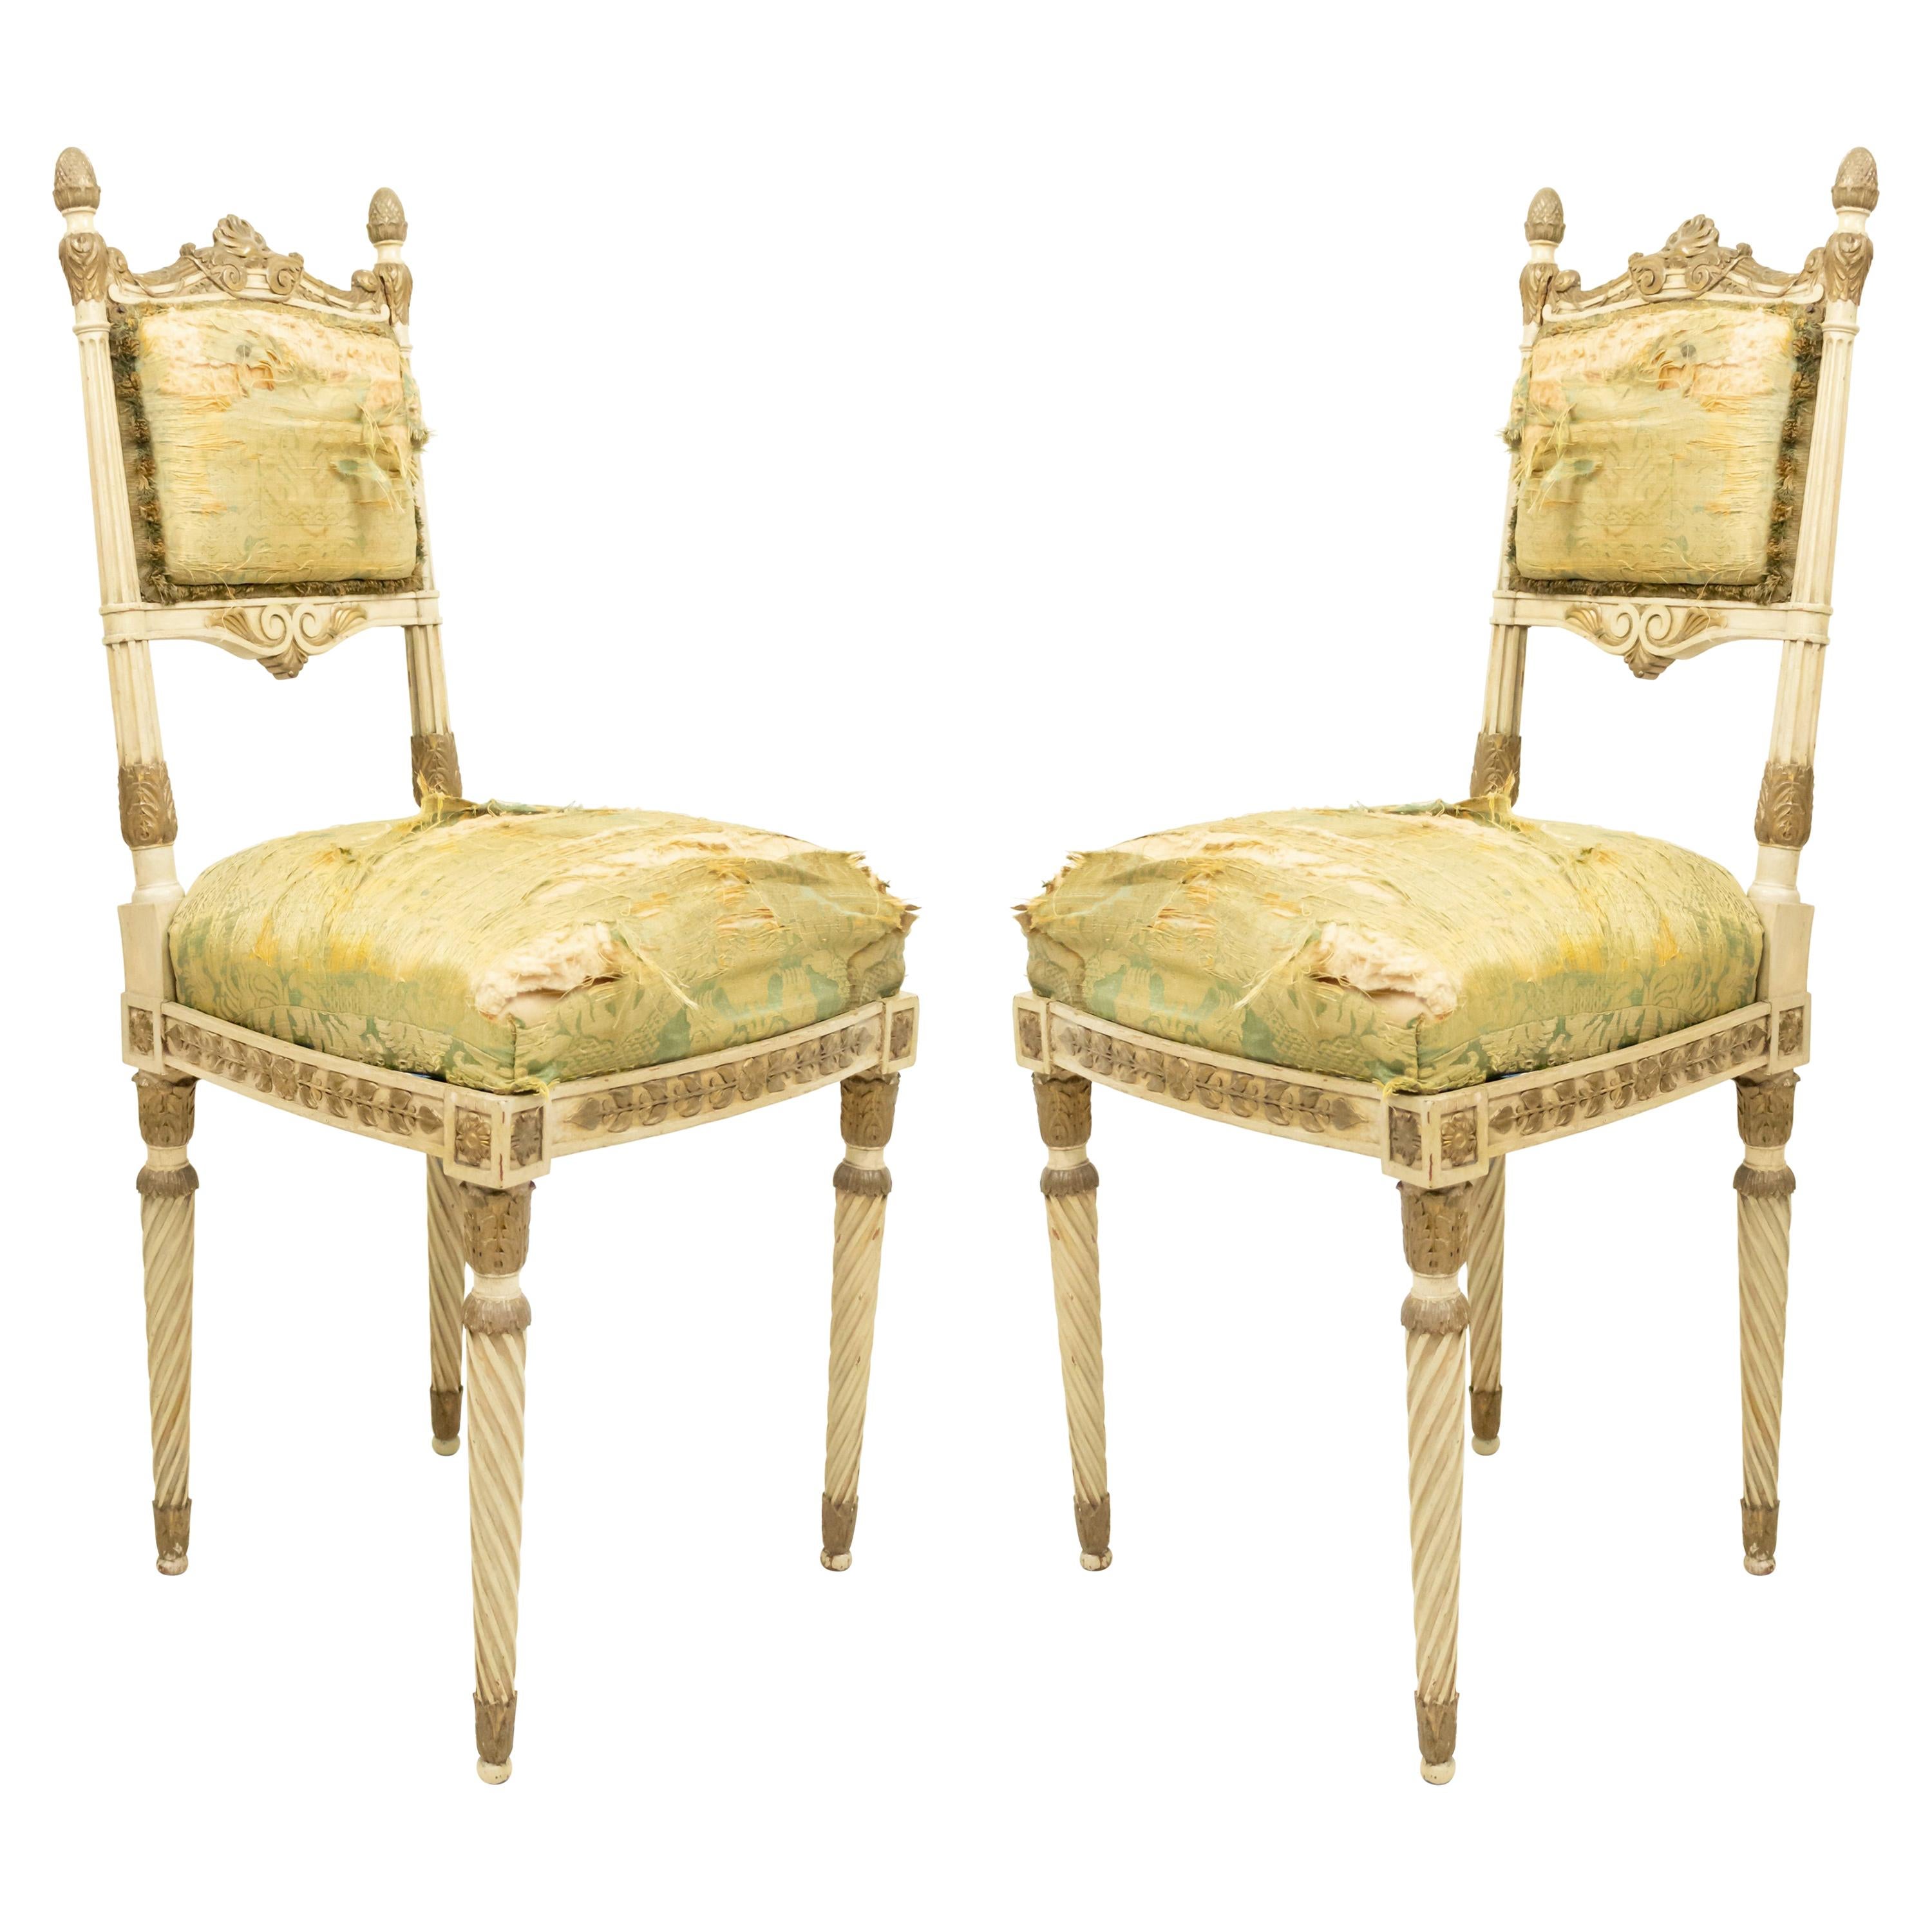 Set of 4 Italian Neoclassic Silk Upholstery Chairs For Sale